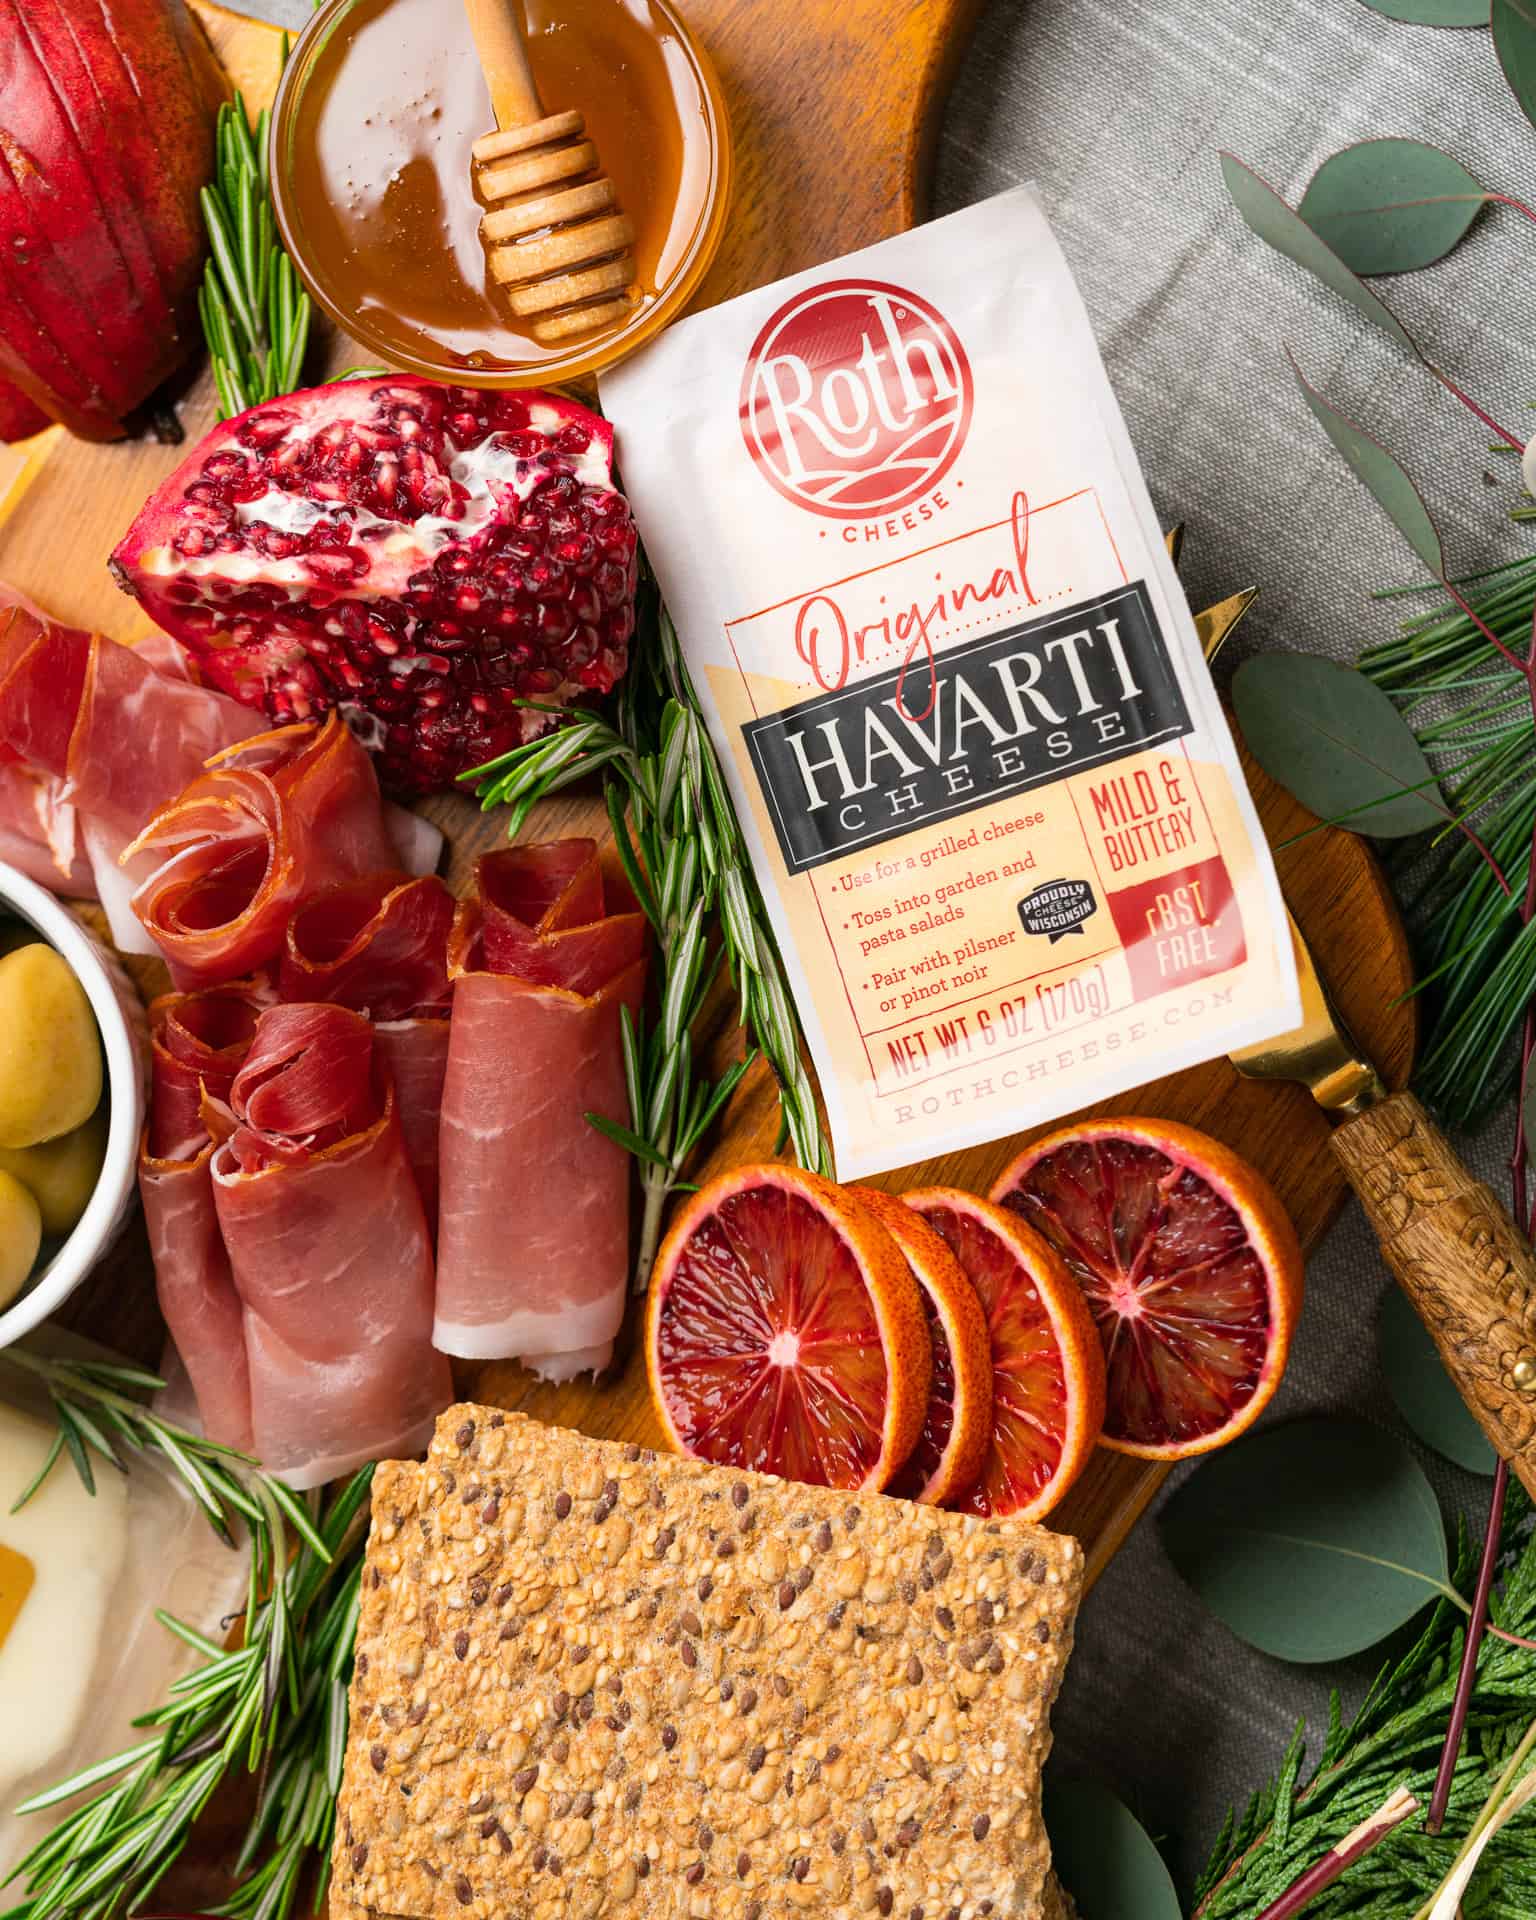 Roth Cheese Havarti Cheese sitting on charcuterie board with blood oranges and various meats